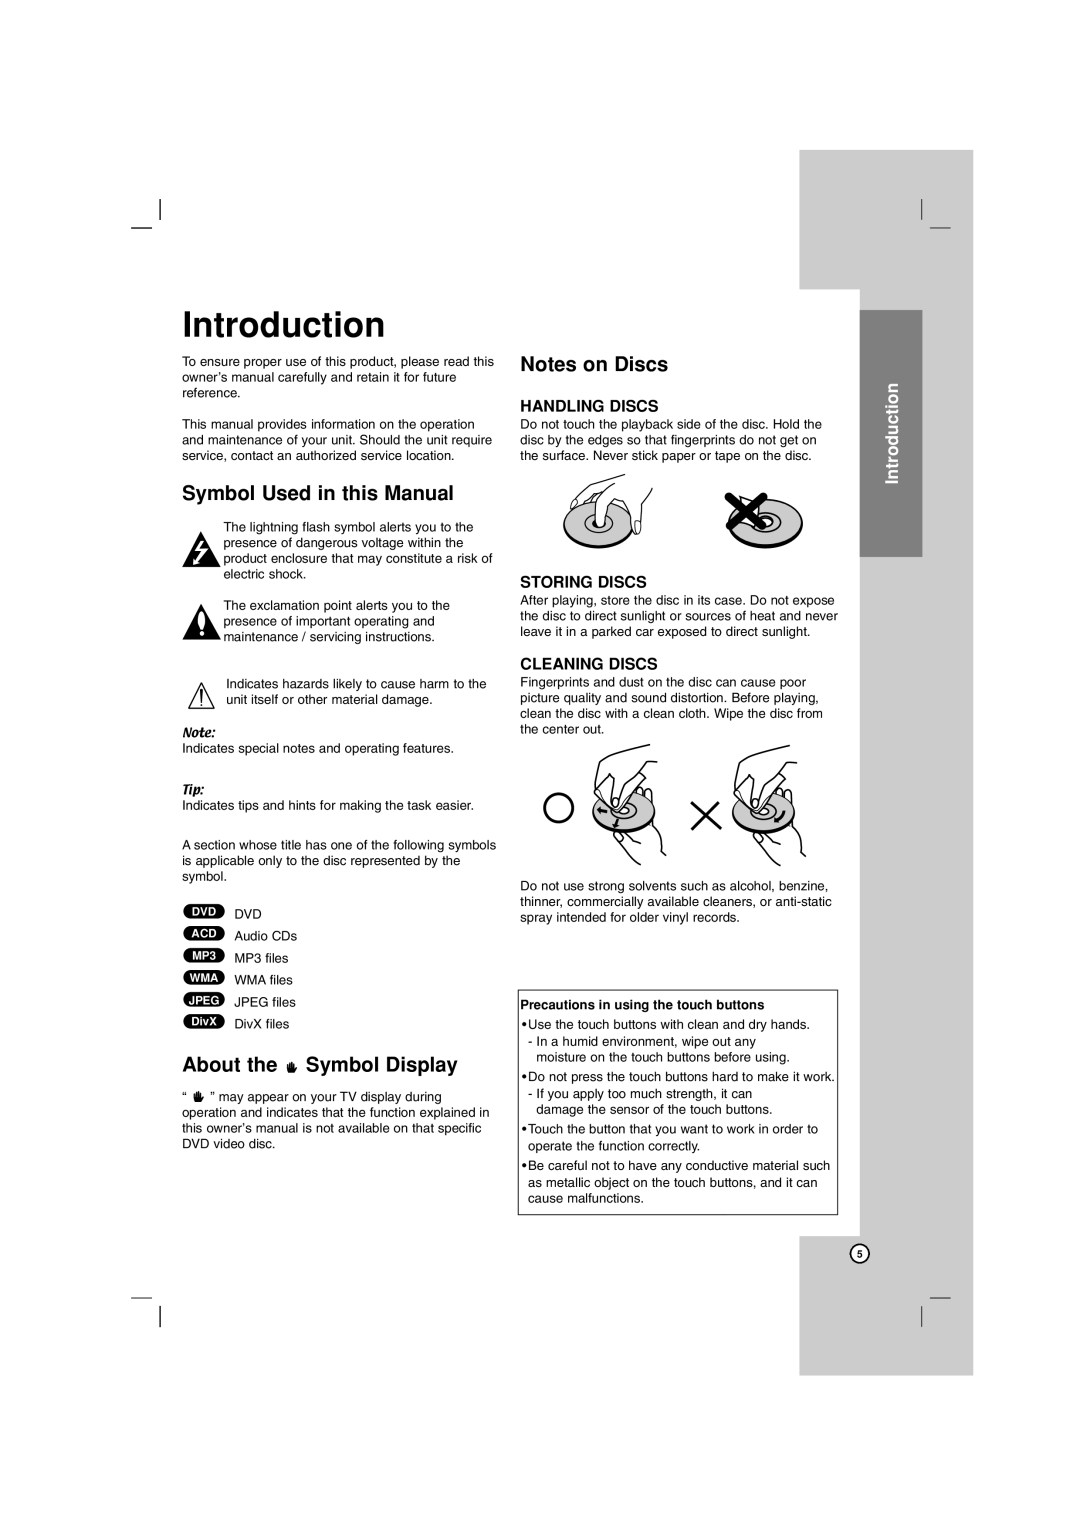 LG Electronics LHT764 Introduction, Symbol Used in this Manual, About the Symbol Display, Notes on Discs, Handling Discs 